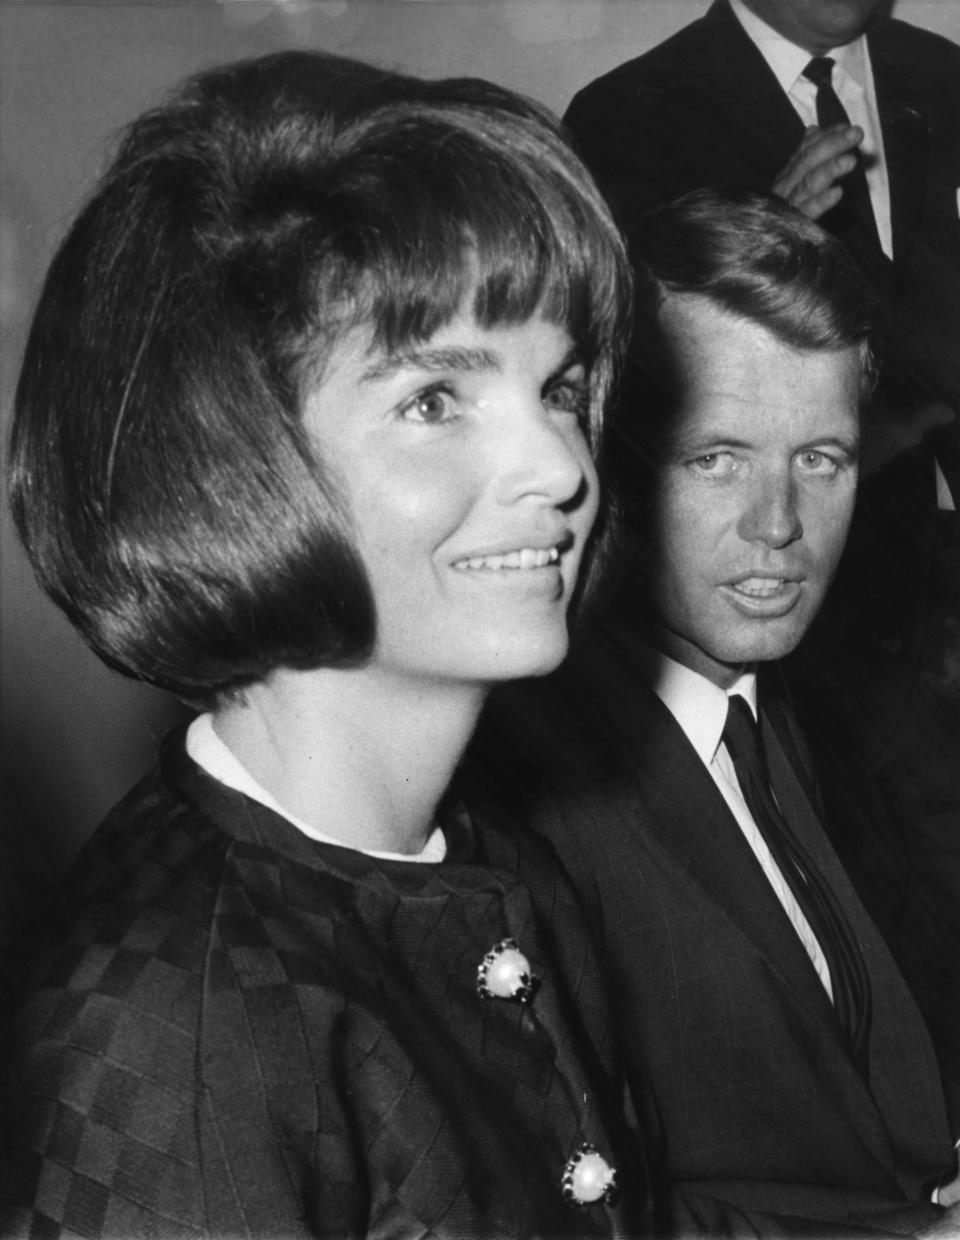 FILE - In this May 25, 1964 file photo, Mrs. Jacqueline Kennedy, wife of the late president, John F. Kennedy, talks to newsmen during a preview tour of the exhibit of the late President Kennedy's mementoes, in New York. At her side is U.S. Attorney General Robert Kennedy, brother of John F. Kennedy. Janis Hirsch's note, among some 800,000 sent to Mrs. Kennedy in the two months after President John F. Kennedy's Nov. 22, 1963, killing in Dallas, is featured along with about 20 others in "Letters to Jackie: Remembering President Kennedy," airing 9 p.m. EST Sunday, Nov. 17, 2013, on TLC. (AP Photo, File)